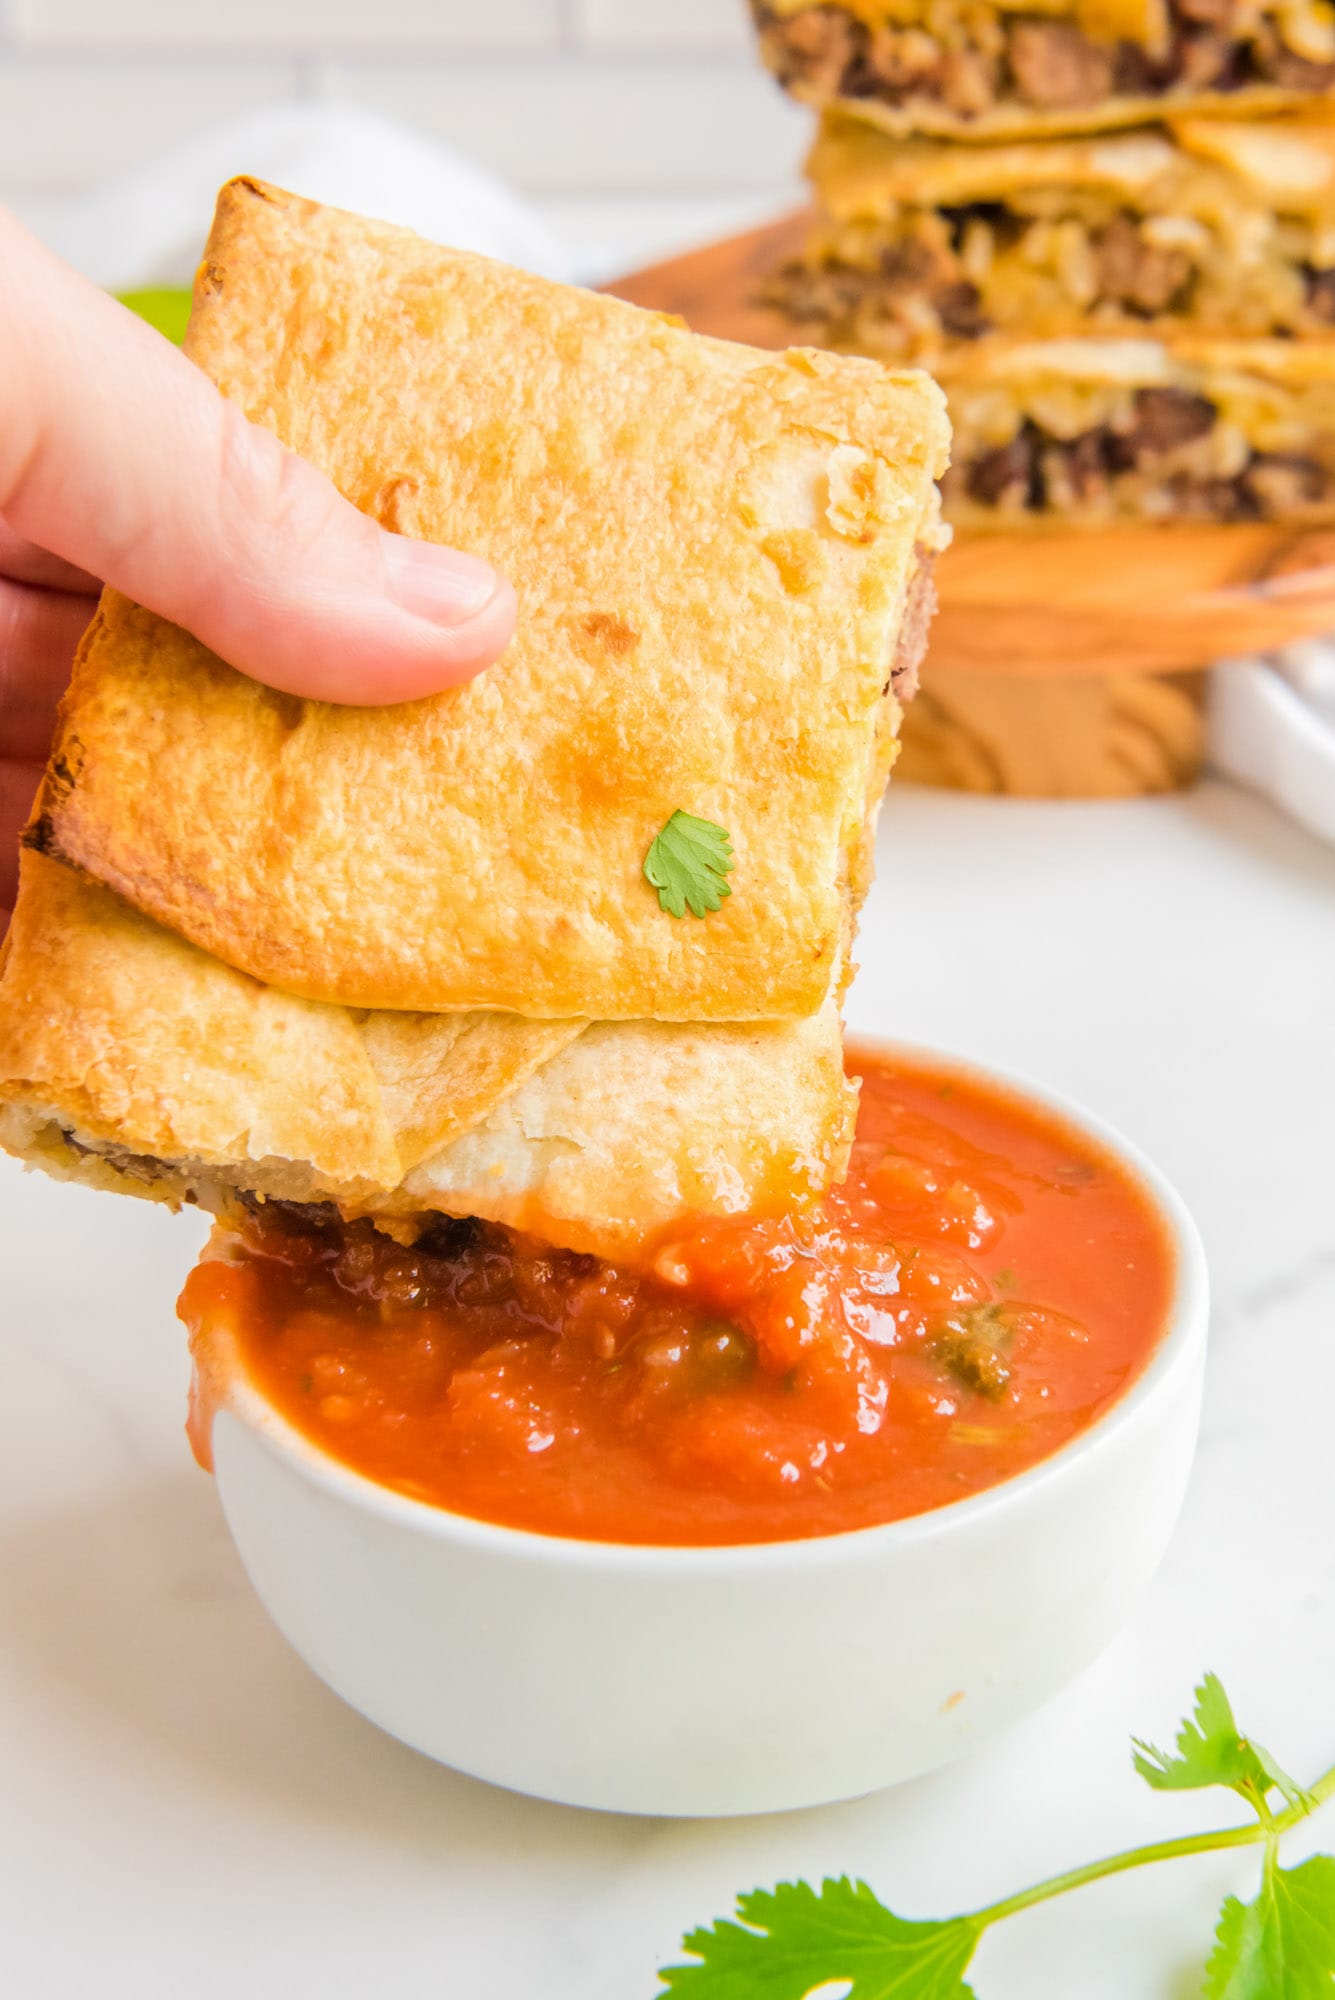 Dipping a square of quesadilla in salsa